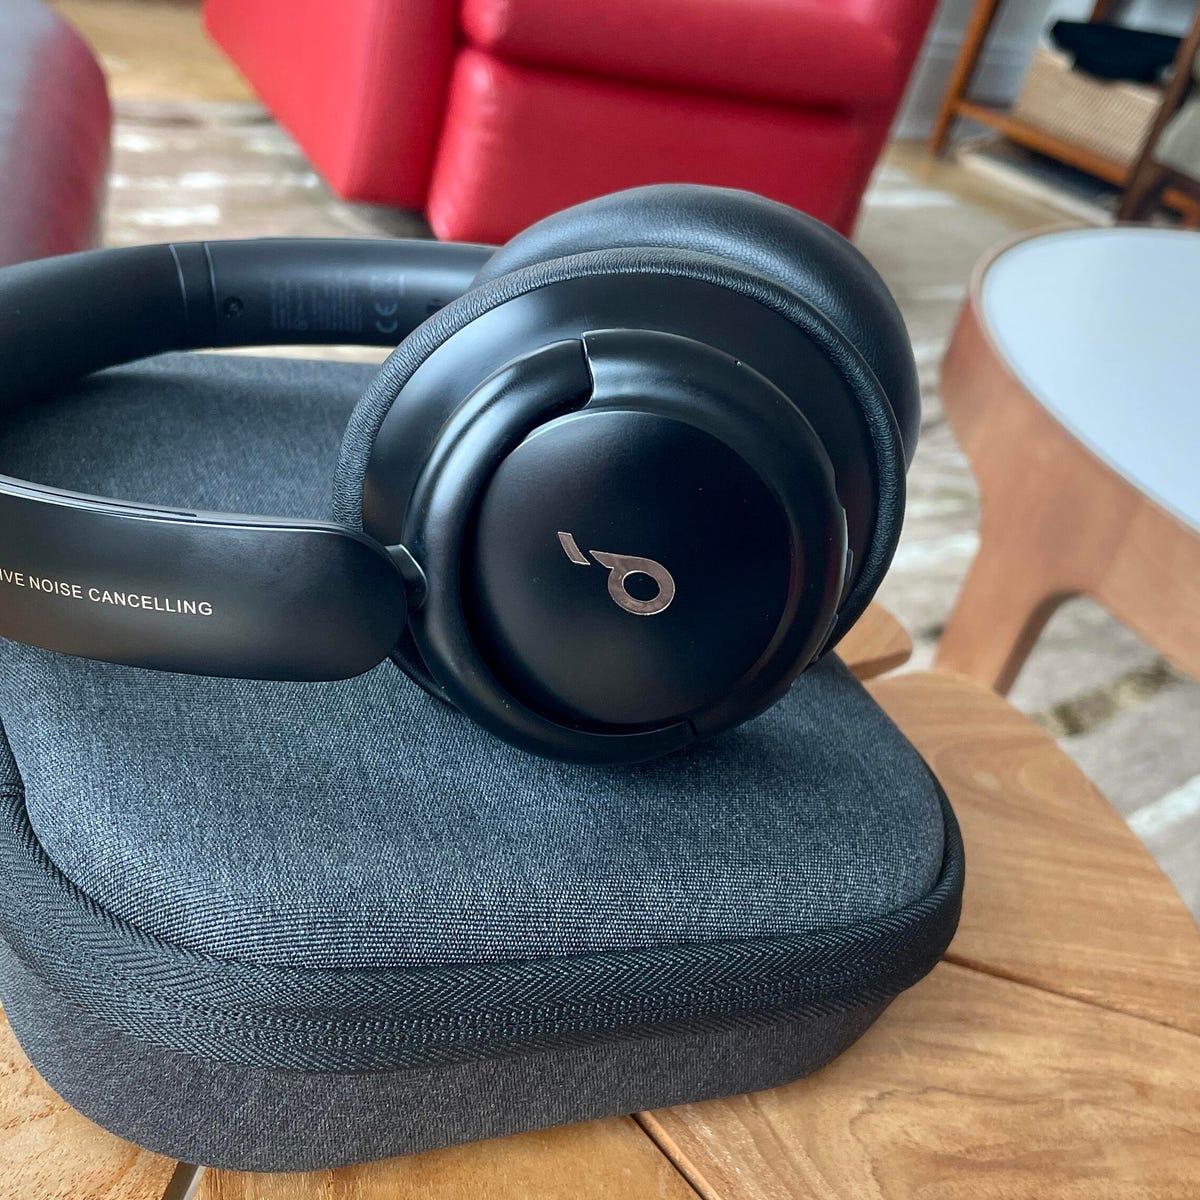 AirPods Max alternative: The excellent Soundcore Life Q30 for $65